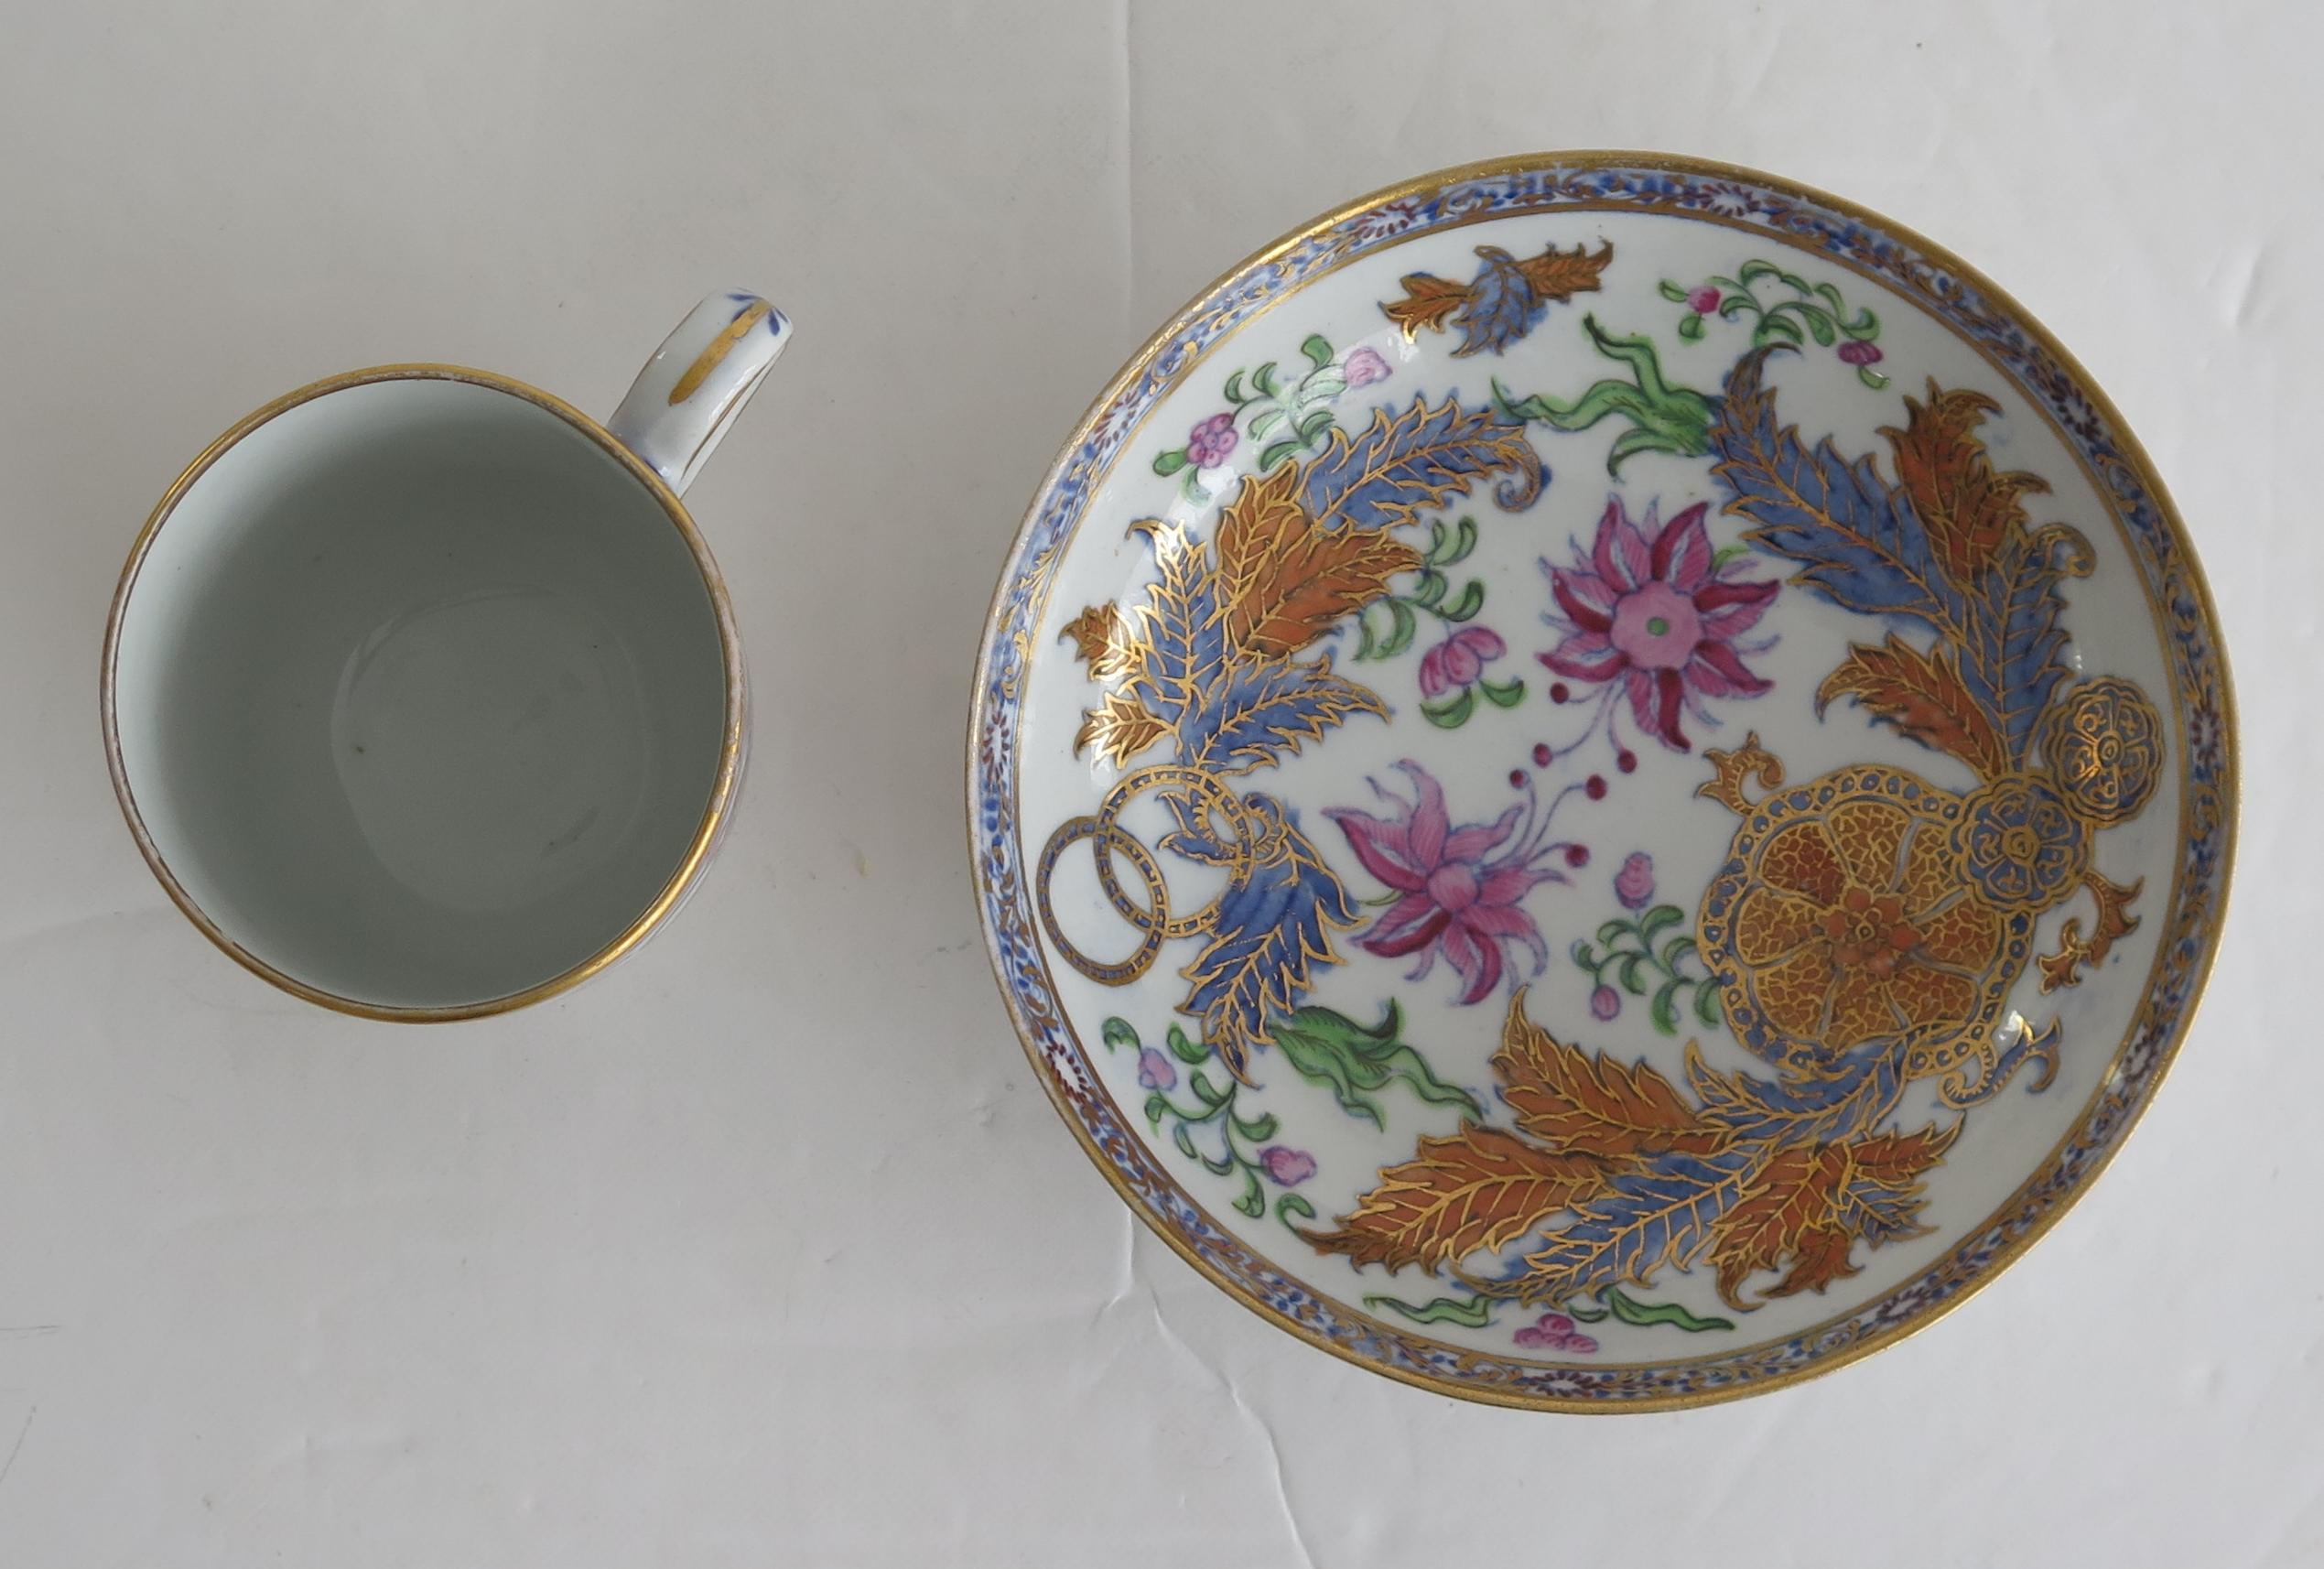 18th Century Newhall Porcelain Duo Coffee Cup and Saucer Pattern 274, Circa 1795 2